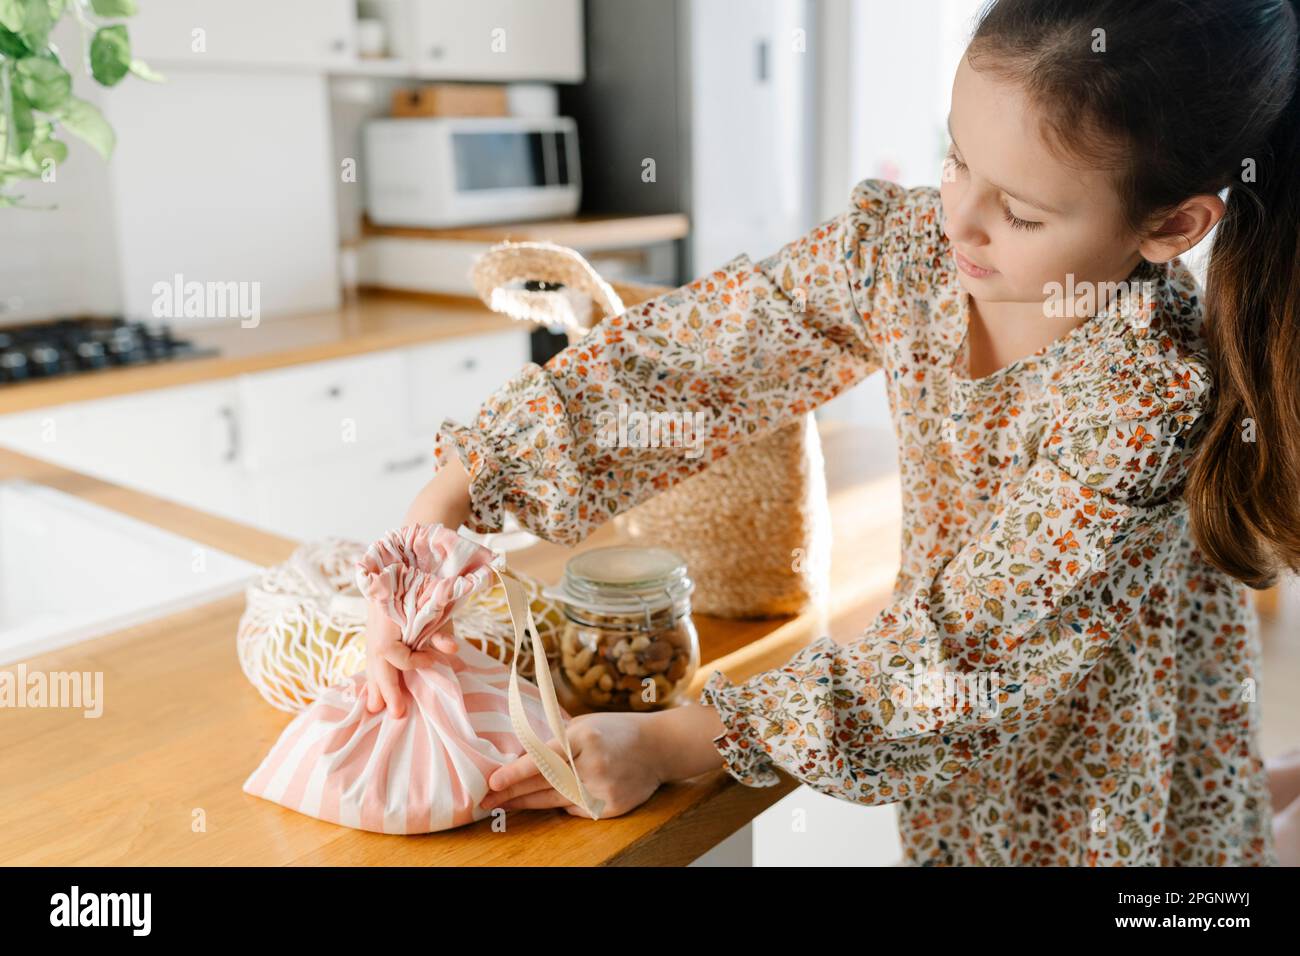 Girl with reusable bags on kitchen island at home Stock Photo